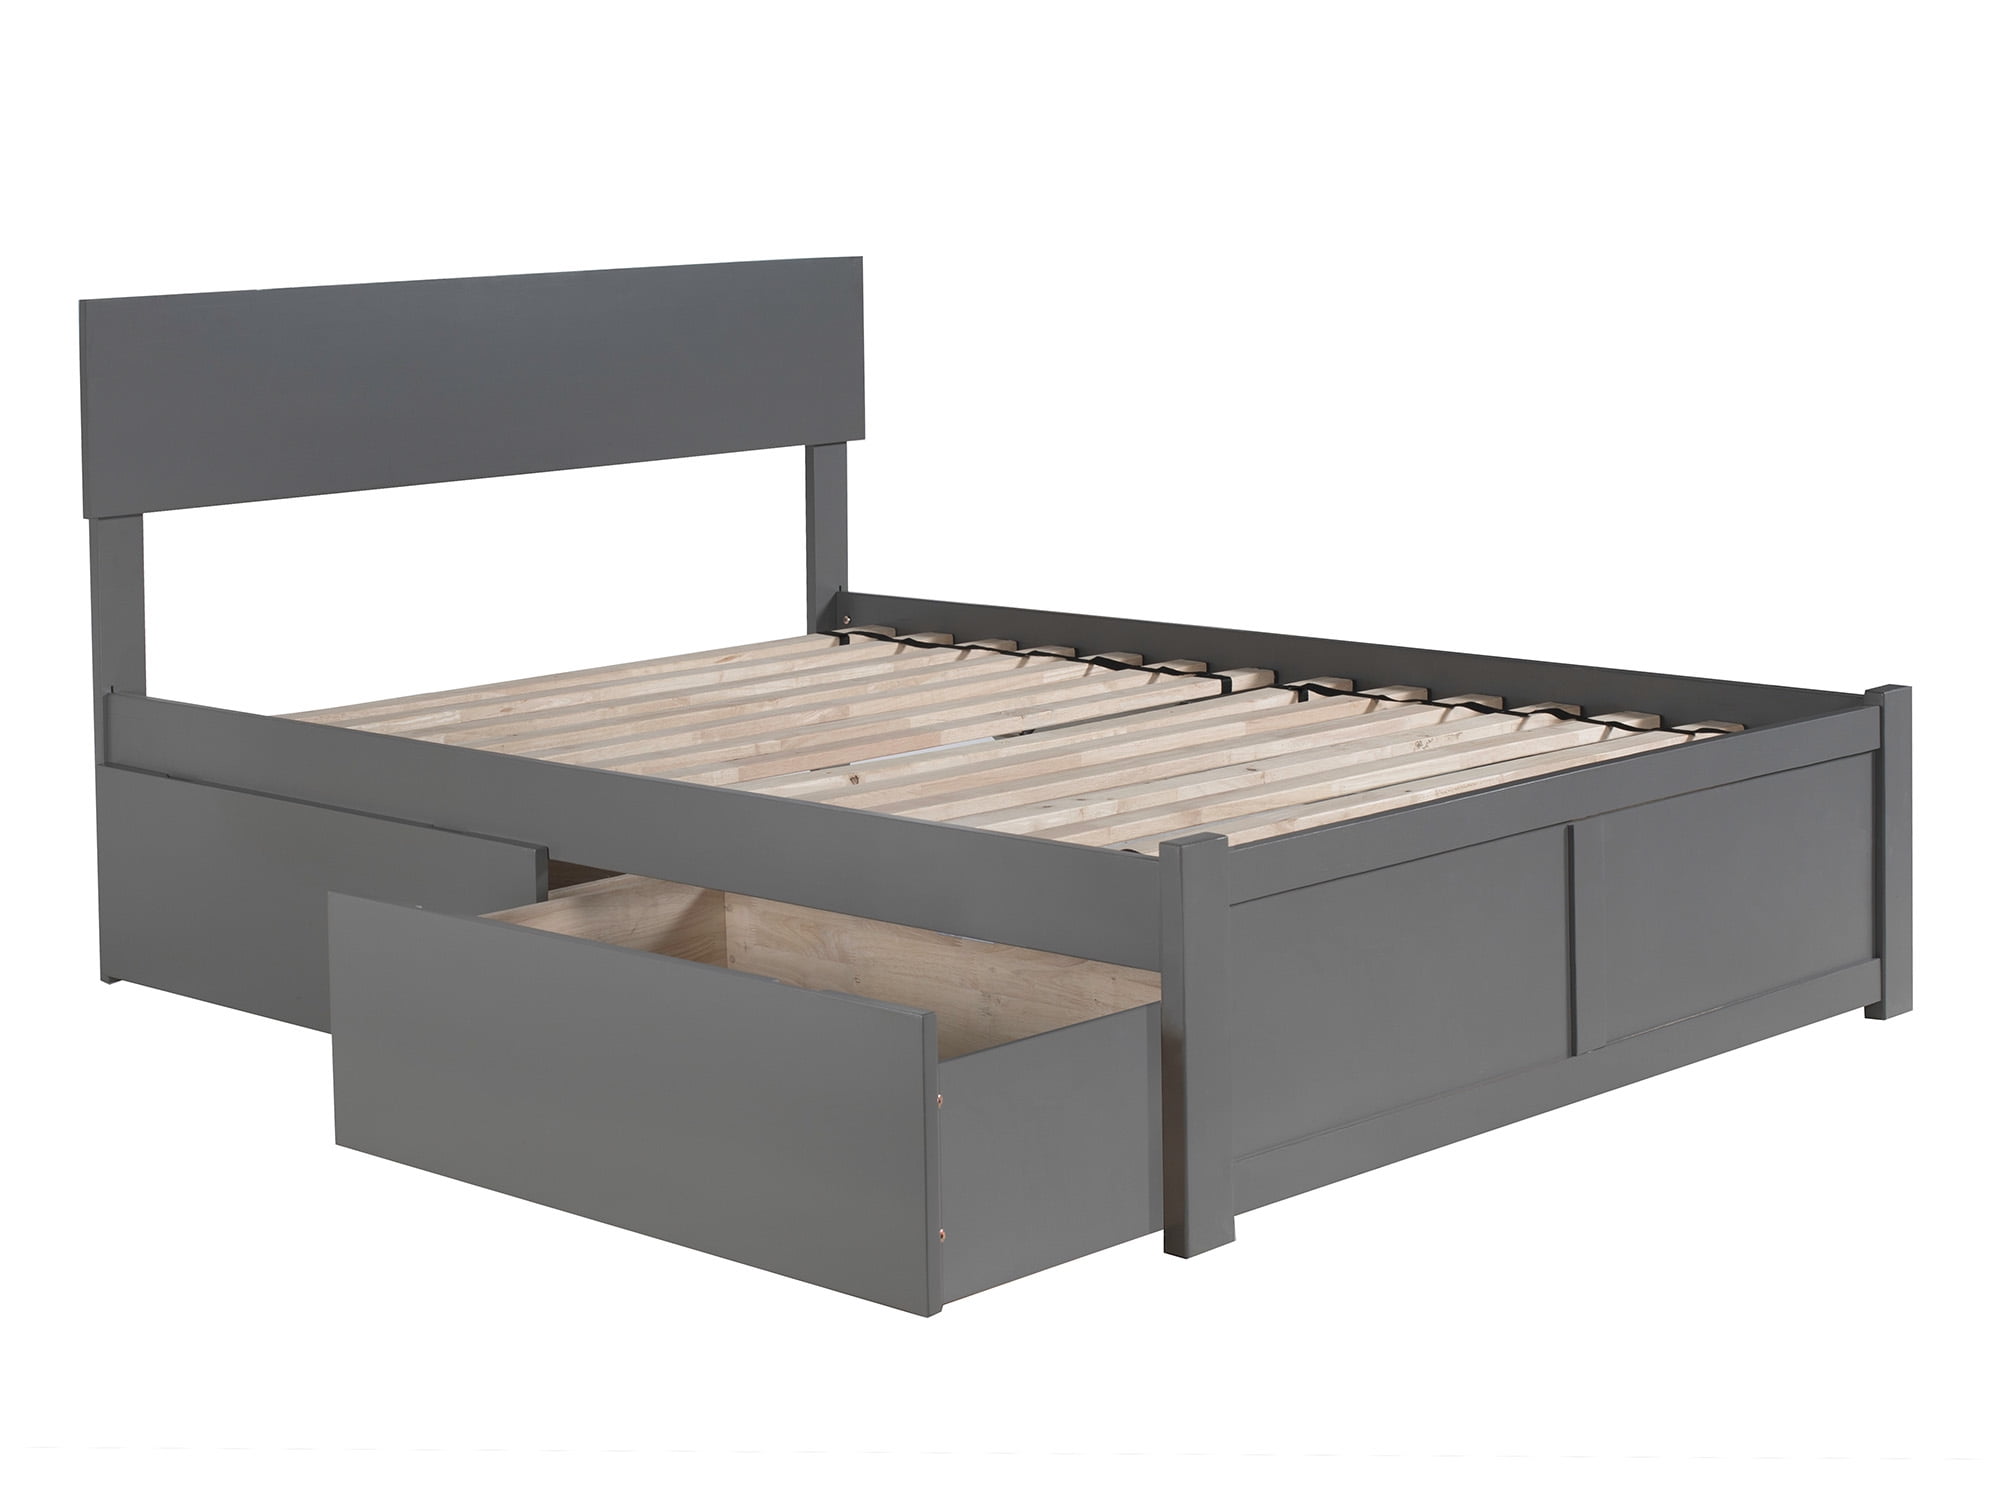 Ar8142119 Orlando Queen Platform Bed With Flat Panel Foot Board & 2 Urban Bed Drawers - Grey